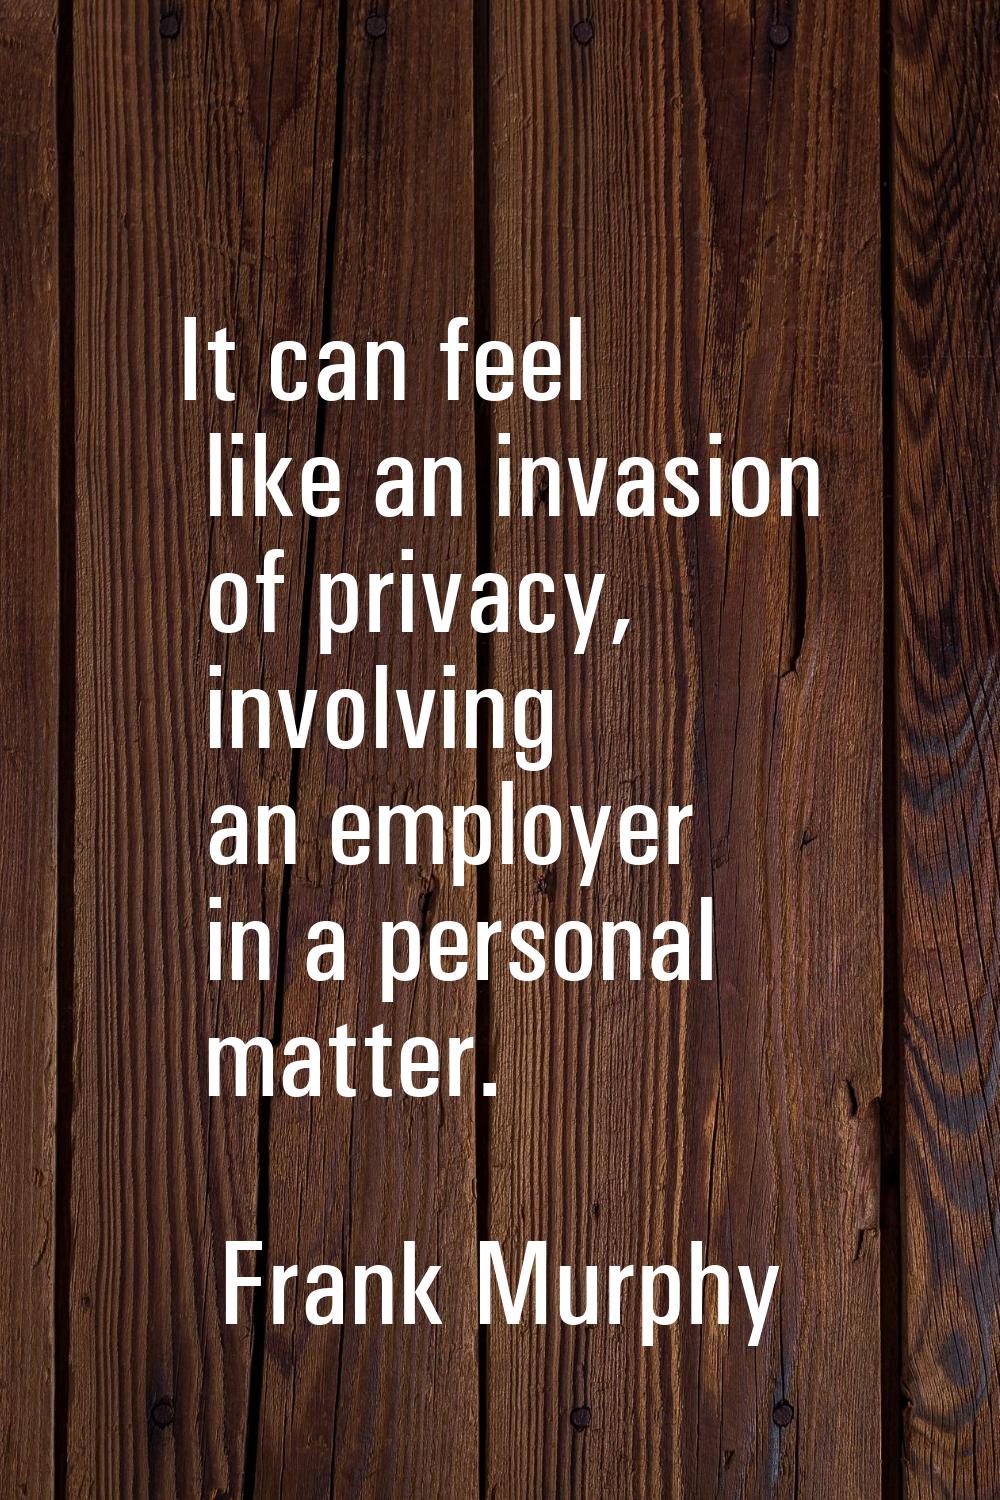 It can feel like an invasion of privacy, involving an employer in a personal matter.